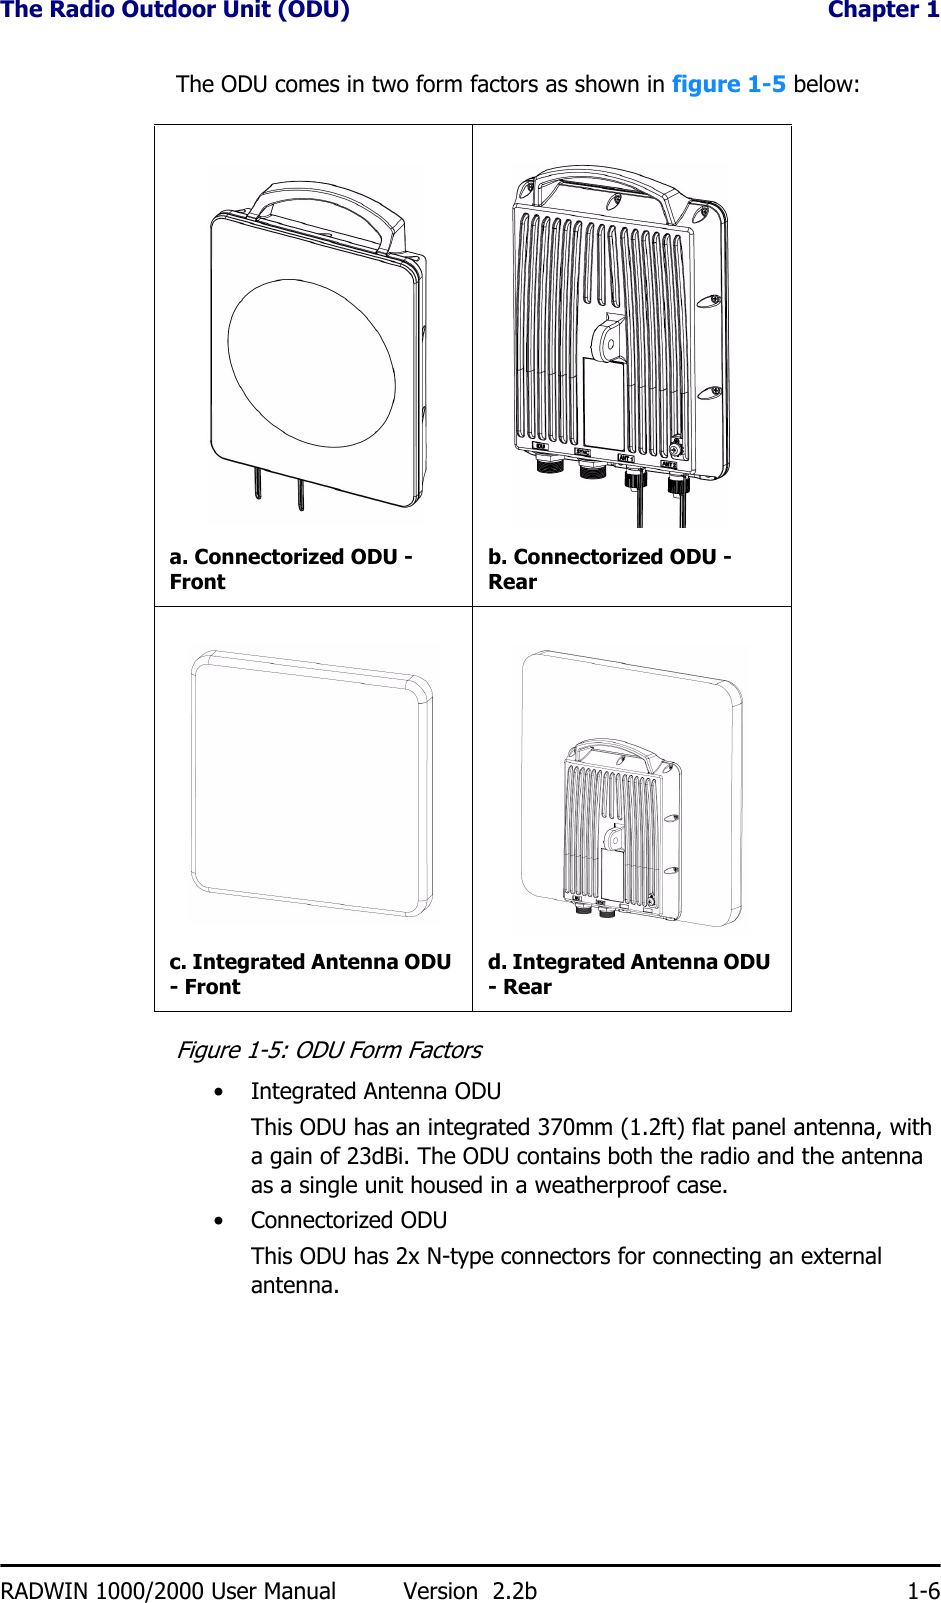 The Radio Outdoor Unit (ODU)  Chapter 1RADWIN 1000/2000 User Manual Version  2.2b 1-6The ODU comes in two form factors as shown in figure 1-5 below:Figure 1-5: ODU Form Factors• Integrated Antenna ODUThis ODU has an integrated 370mm (1.2ft) flat panel antenna, with a gain of 23dBi. The ODU contains both the radio and the antenna as a single unit housed in a weatherproof case.•Connectorized ODUThis ODU has 2x N-type connectors for connecting an external antenna.a. Connectorized ODU - Frontb. Connectorized ODU - Rearc. Integrated Antenna ODU - Frontd. Integrated Antenna ODU - Rear